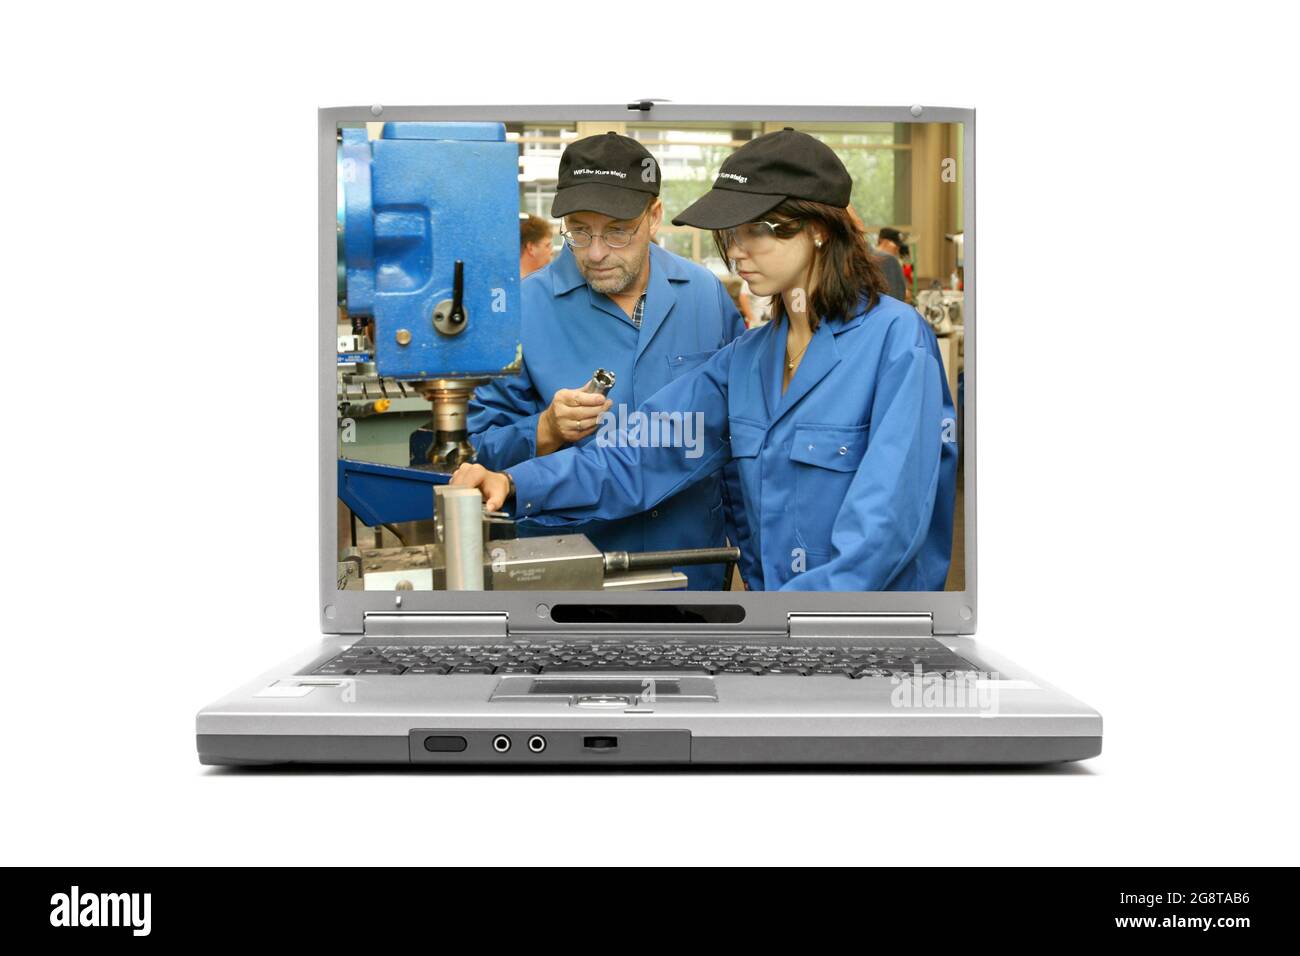 'vocational training' on the display of a laptop computer Stock Photo